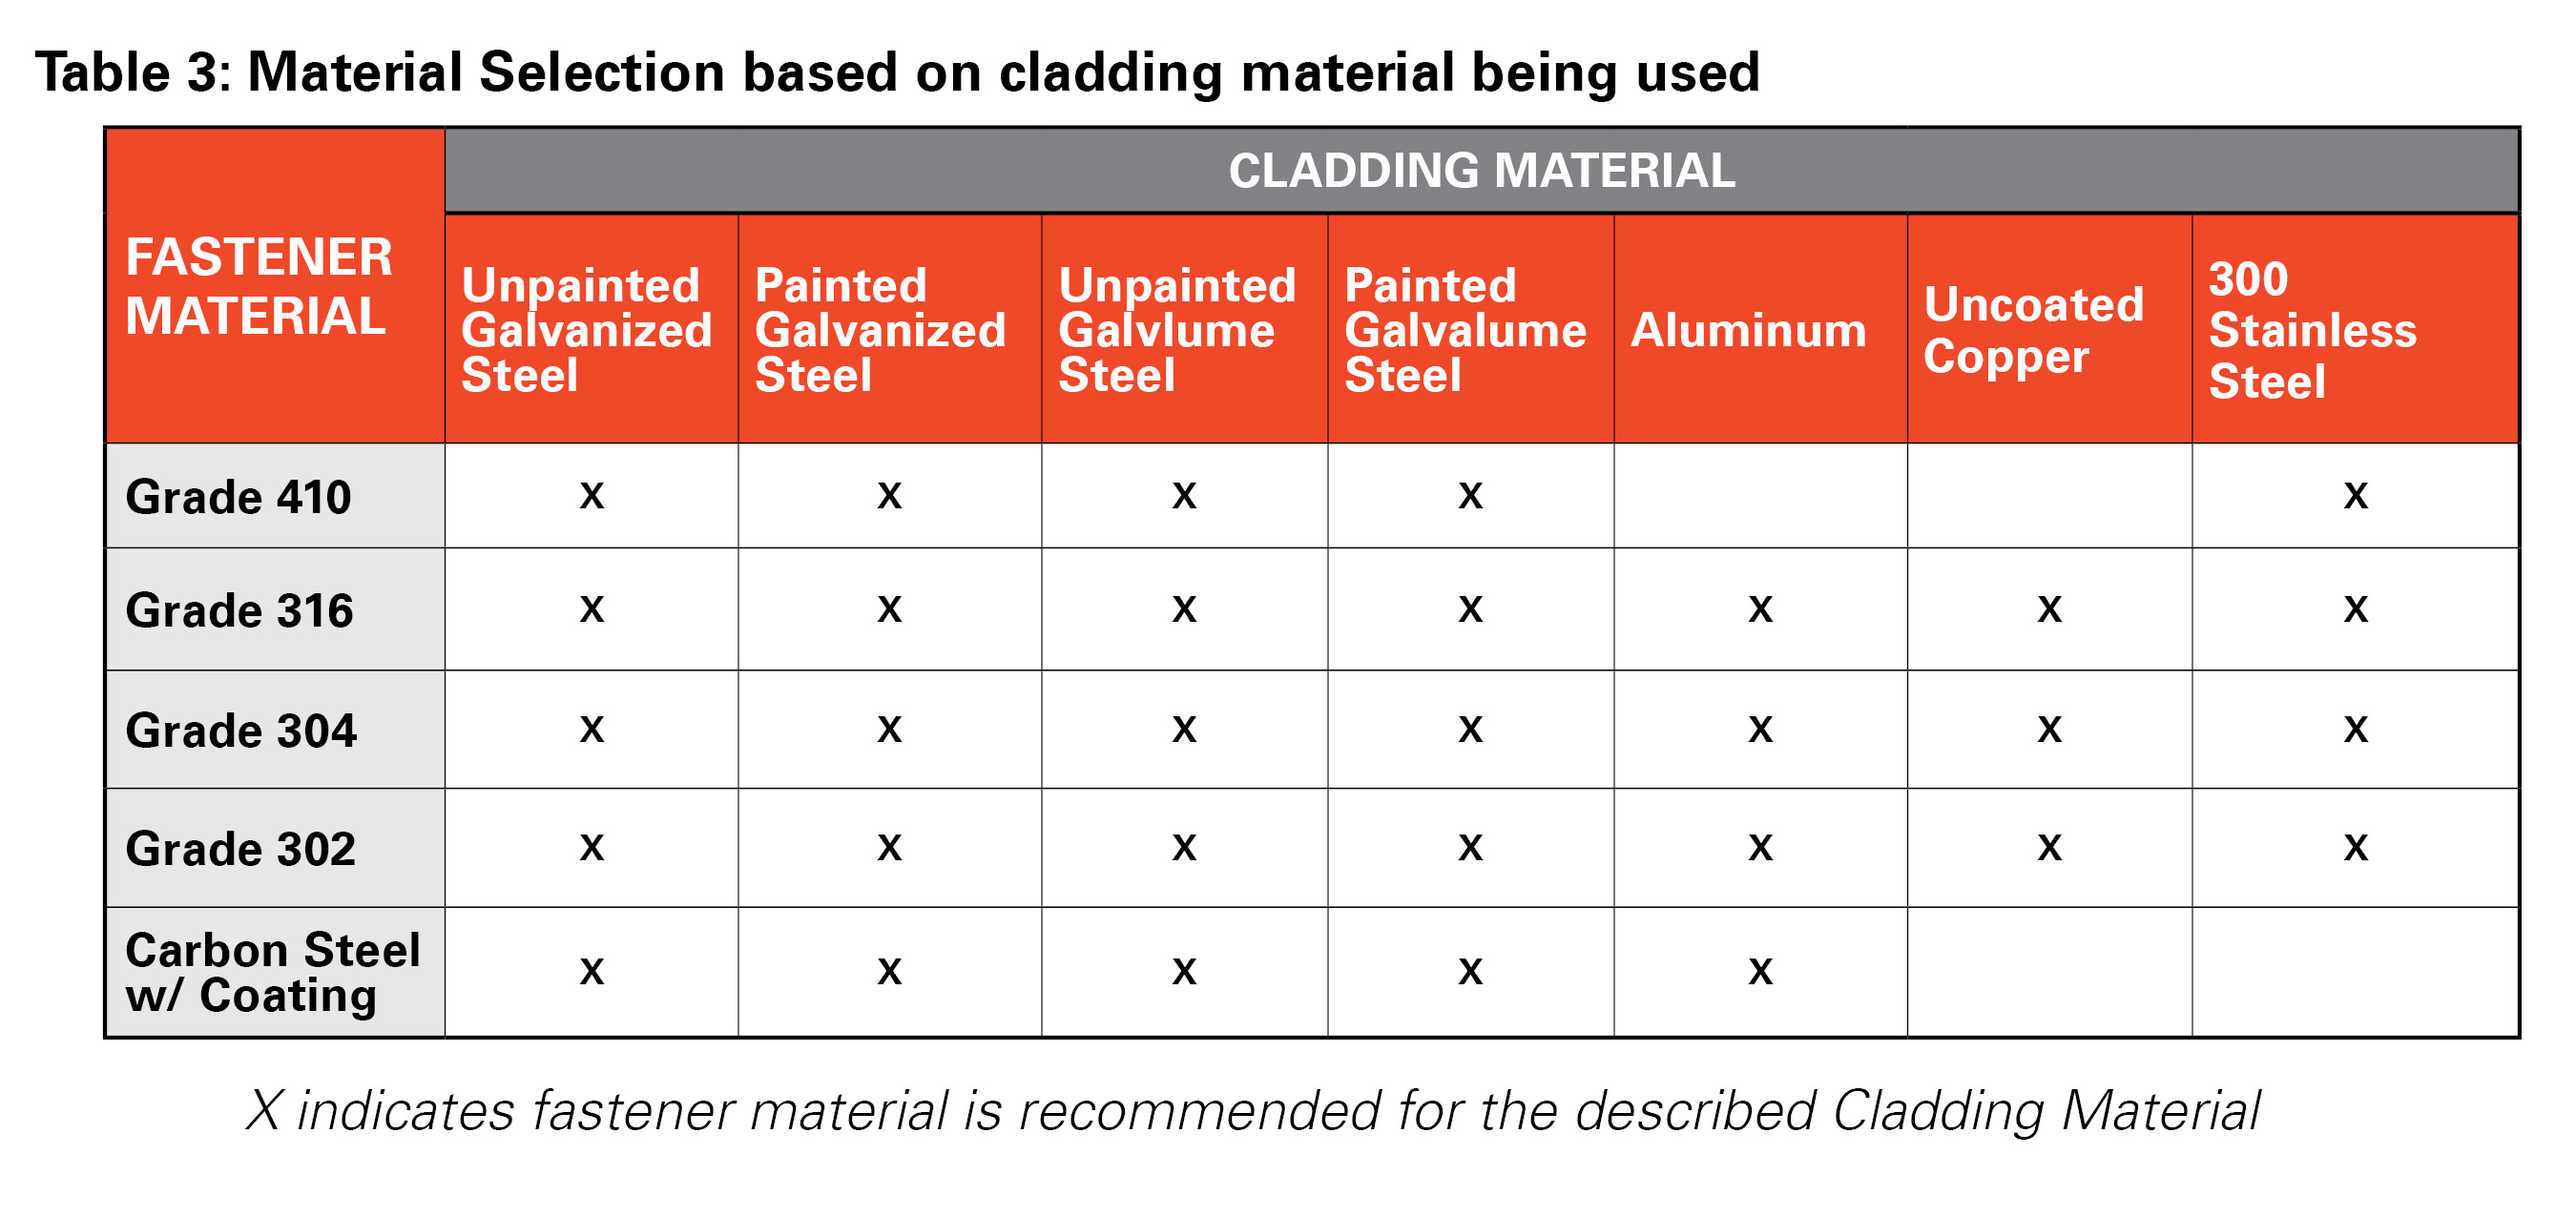 Stainless steel, Definition, Composition, Types, & Facts